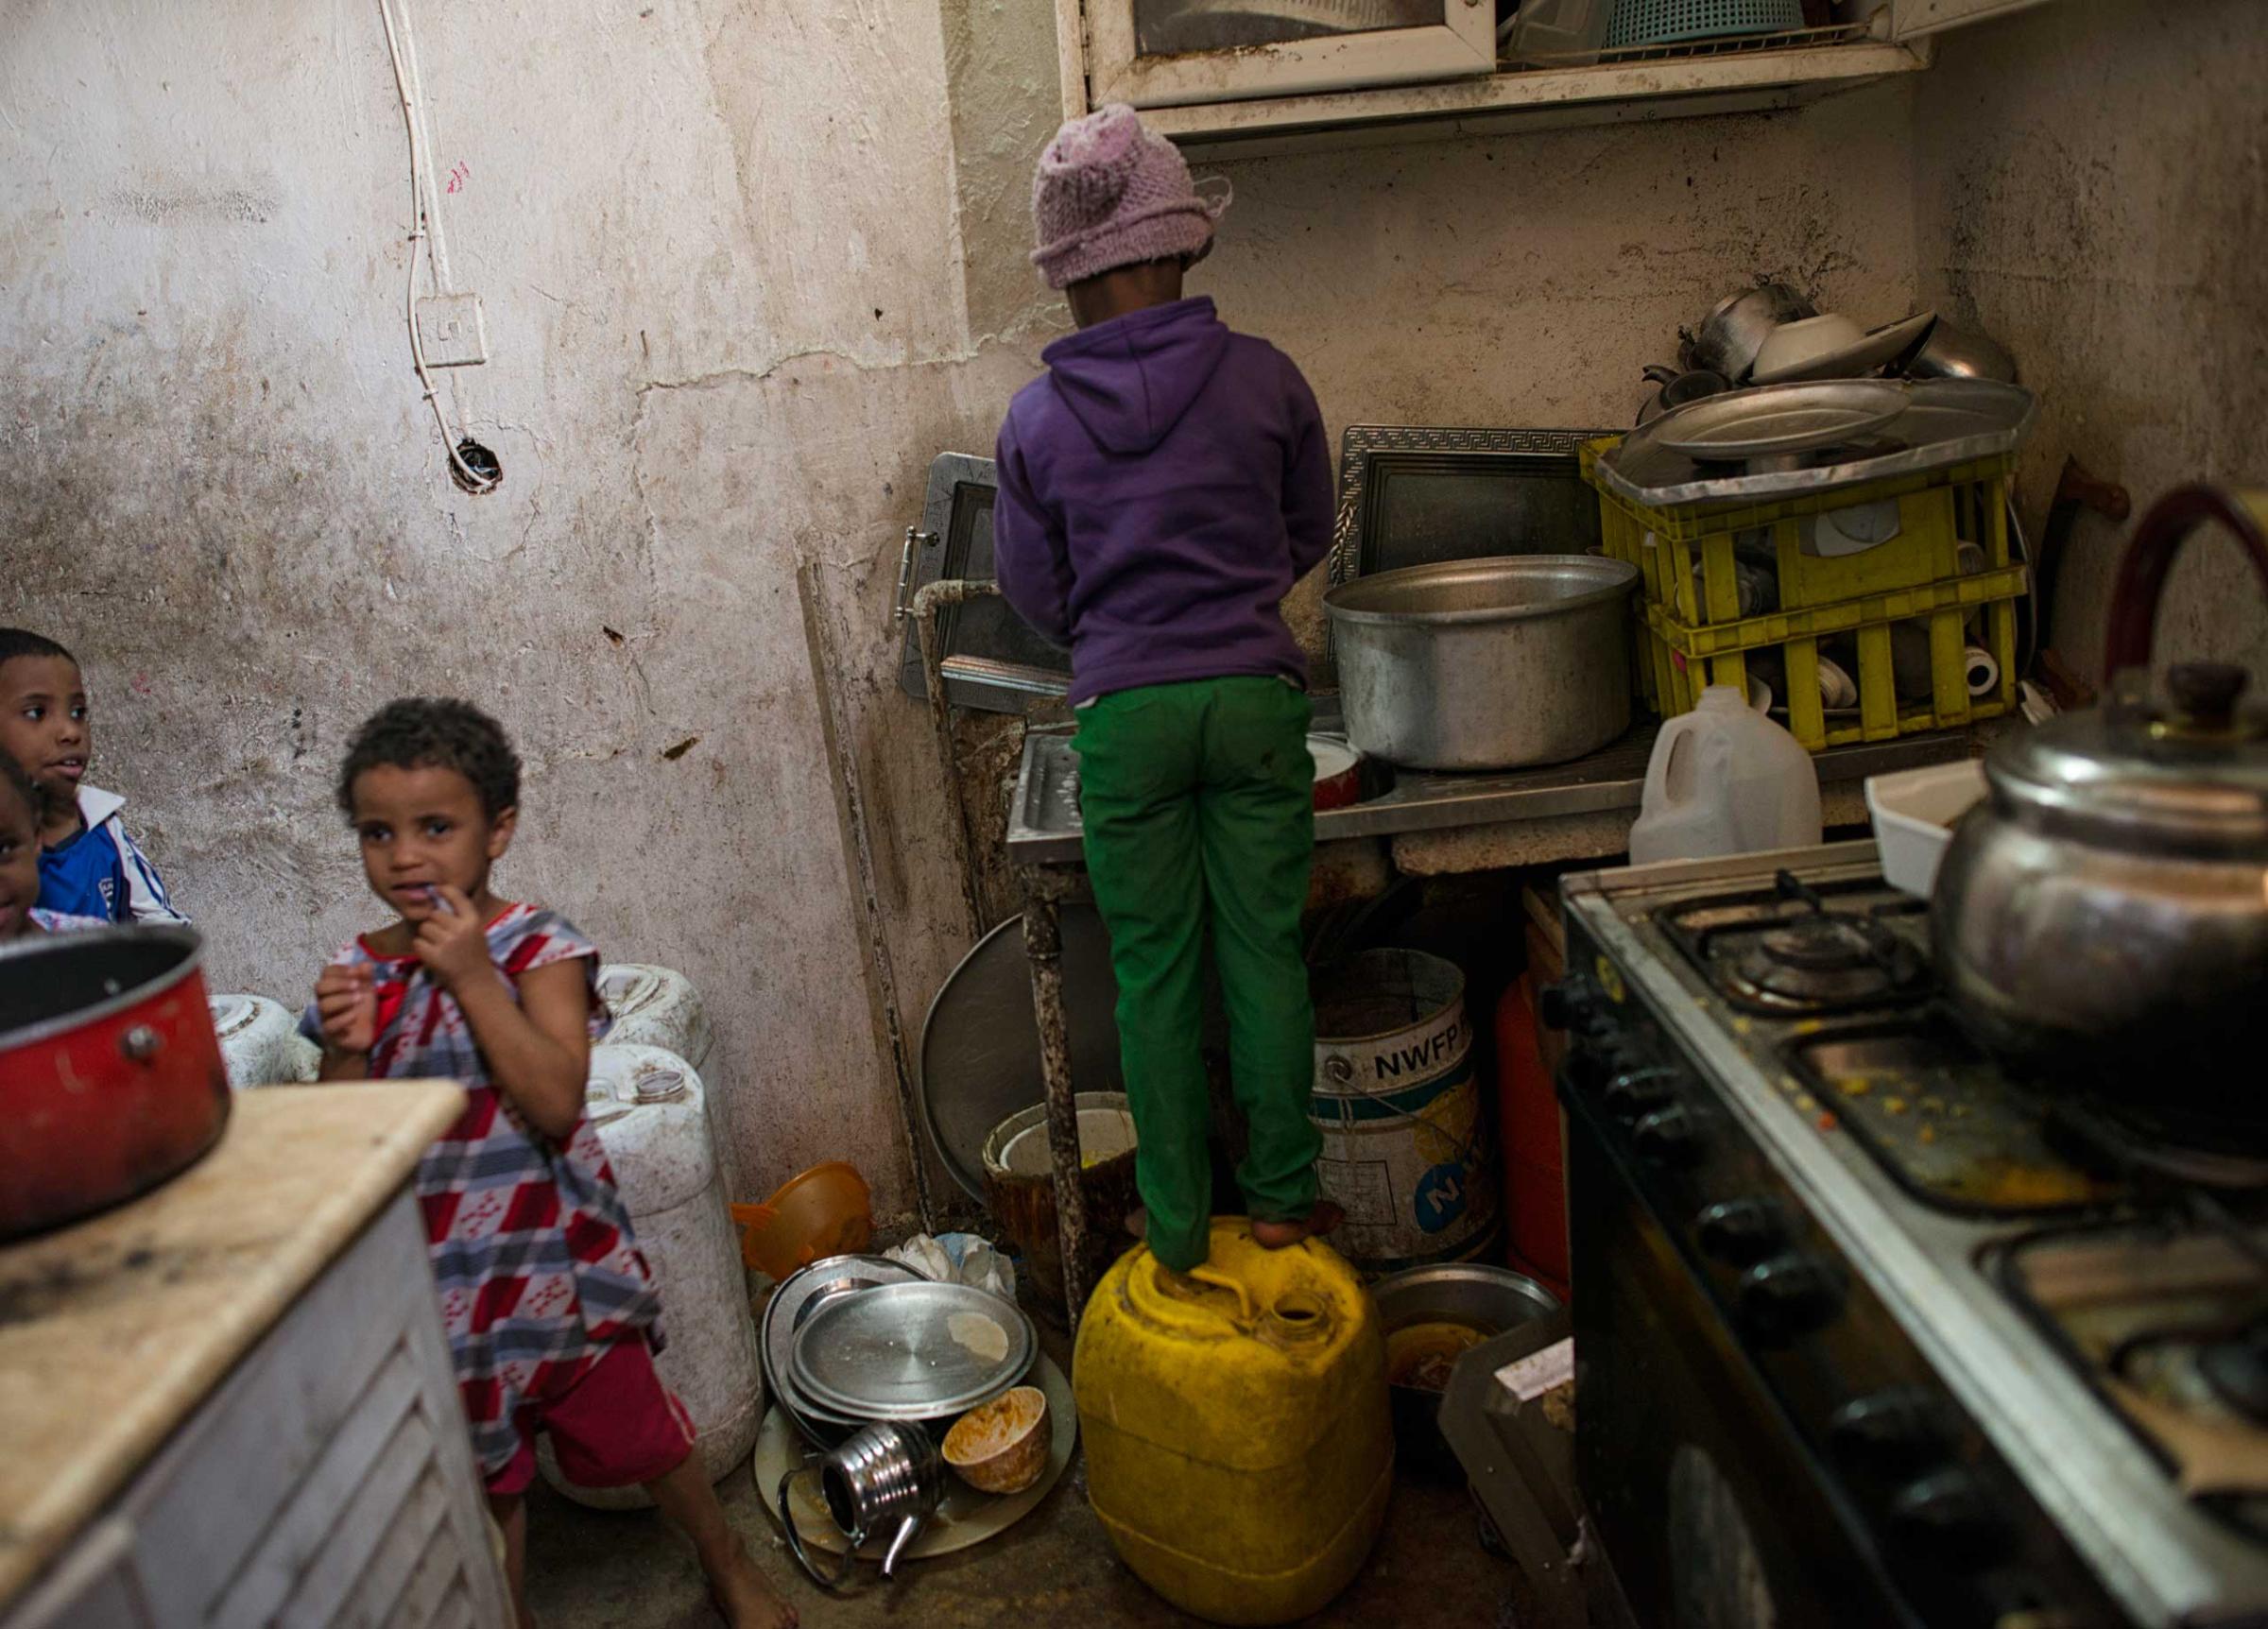 Saudi children do dishes and live in squalor in a neighborhood in South Riyadh, Saudi Arabia,  March 1, 2013.   Like many families across Saudi Arabia who are barely scraping above the poverty line each month, this family relies on the hope of the charity of others to survive. (Credit: Lynsey Addario/ VII)